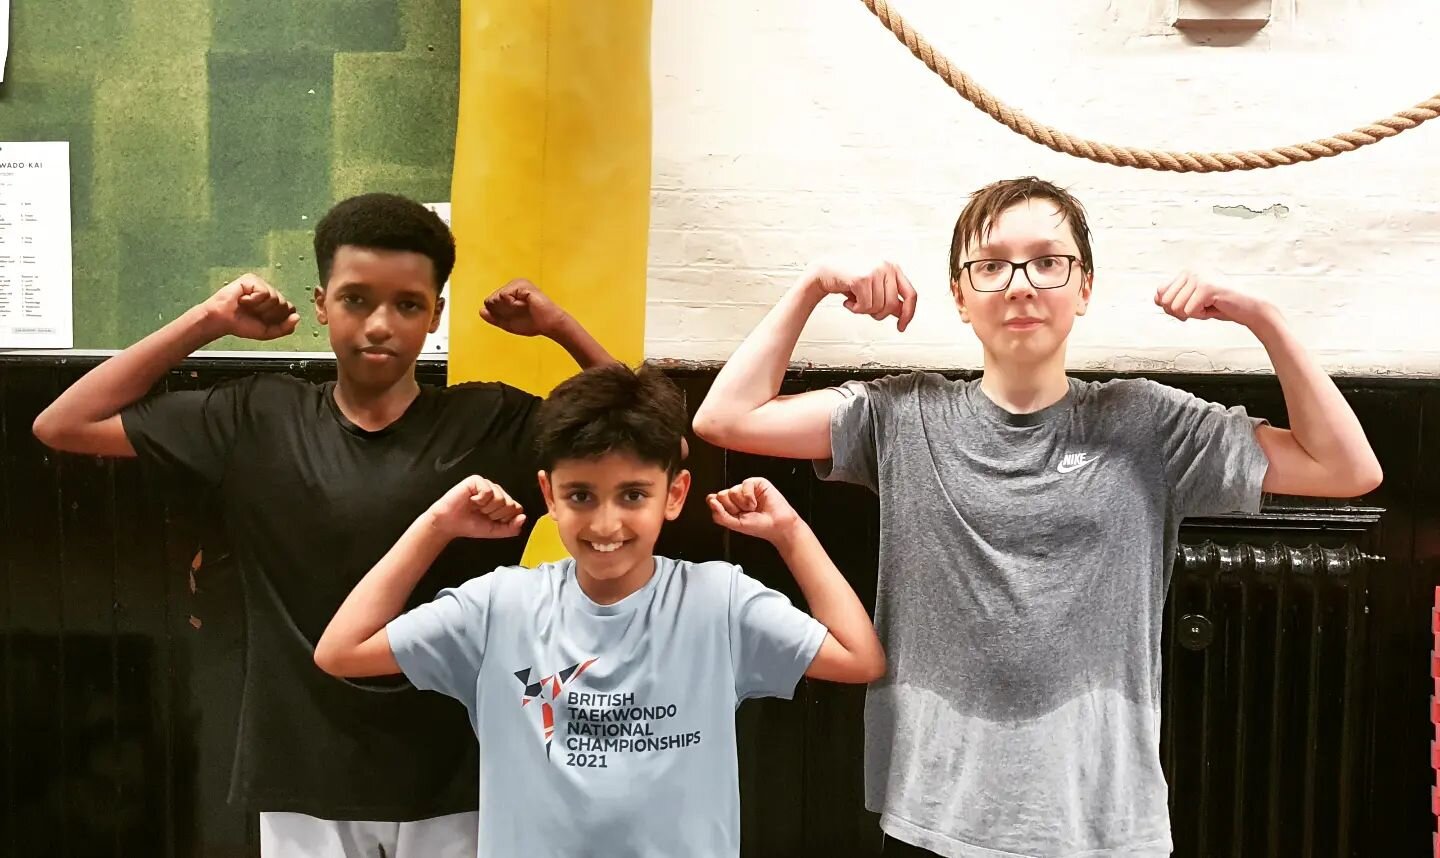 Hard work doesn't necessarily guarantee you success, but without it you don't have a chance. So enjoy your sweat! #teamilyeo 
.
.
.
.
.
.
.
.
.
#chiswick #taekwondo #chiswickmartialarts #chiswickdad #chiswickparents #chiswickmum